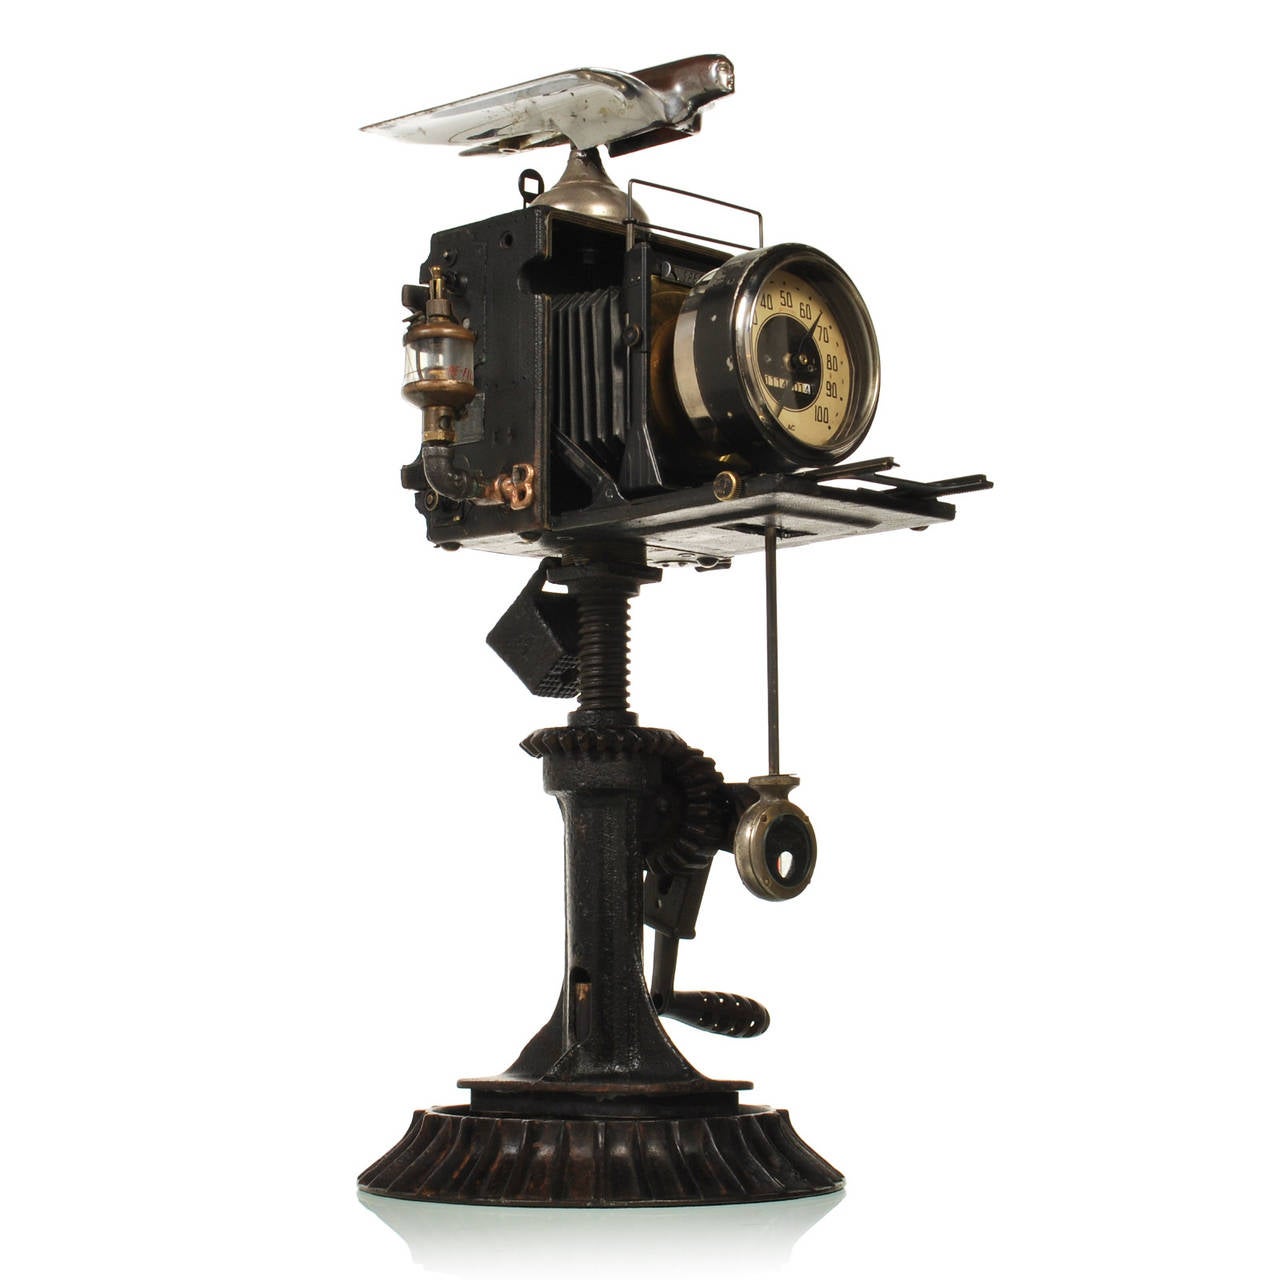 This unique automotive influenced sculpture is made of various antique car parts. The center piece is an antique 4 x 5 Speed Graphic camera by Graflex. The large format camera with its accordion bellows houses a working clock with a pendulum made